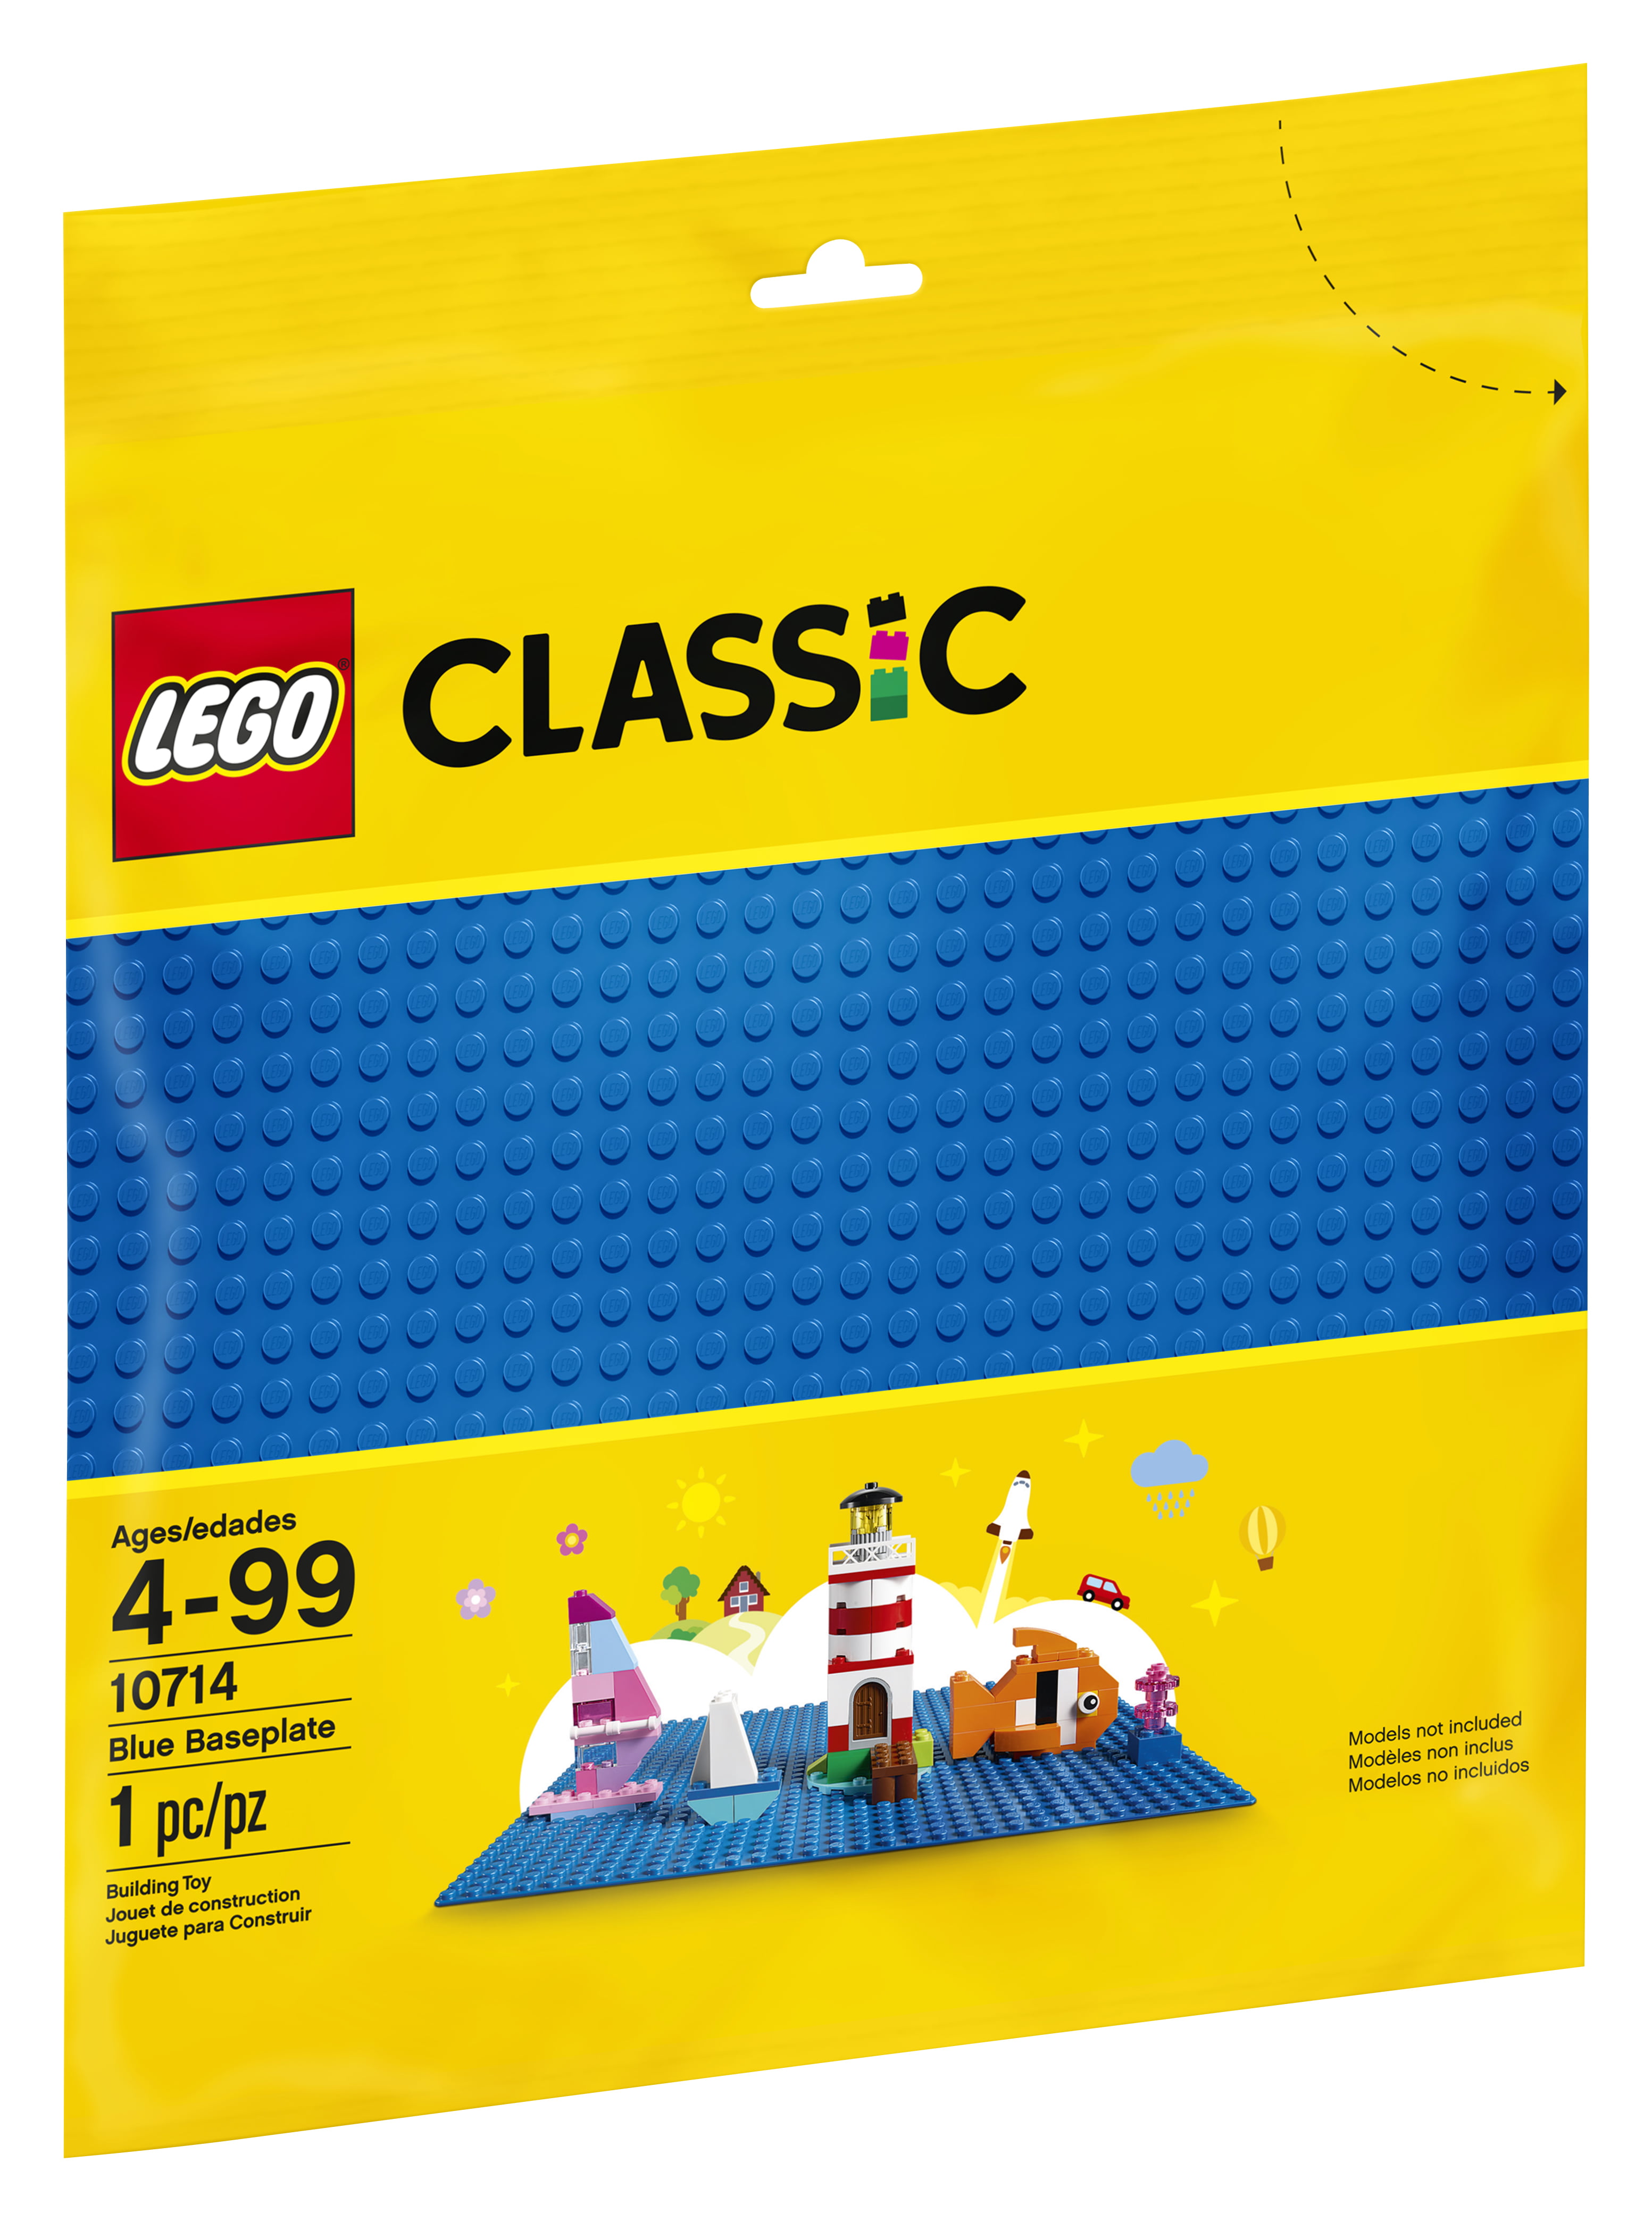 10 x 10 Single-Side and 10 x 5 Double-Sides Base Plates can be Used to Build Double-Layer Buildings Multicolored Baseplate Building Platforms for Building Bricks Compatible with Lego Classic 